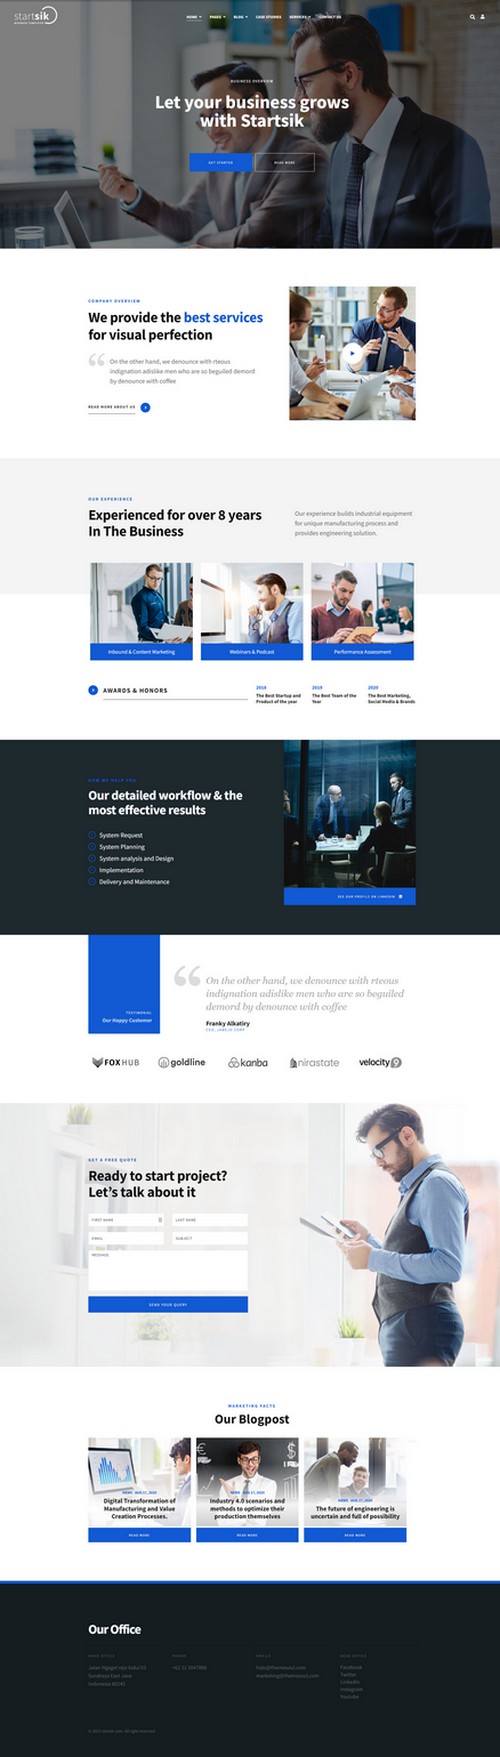 Startsik - Business and Professional Consulting Joomla 4 Template